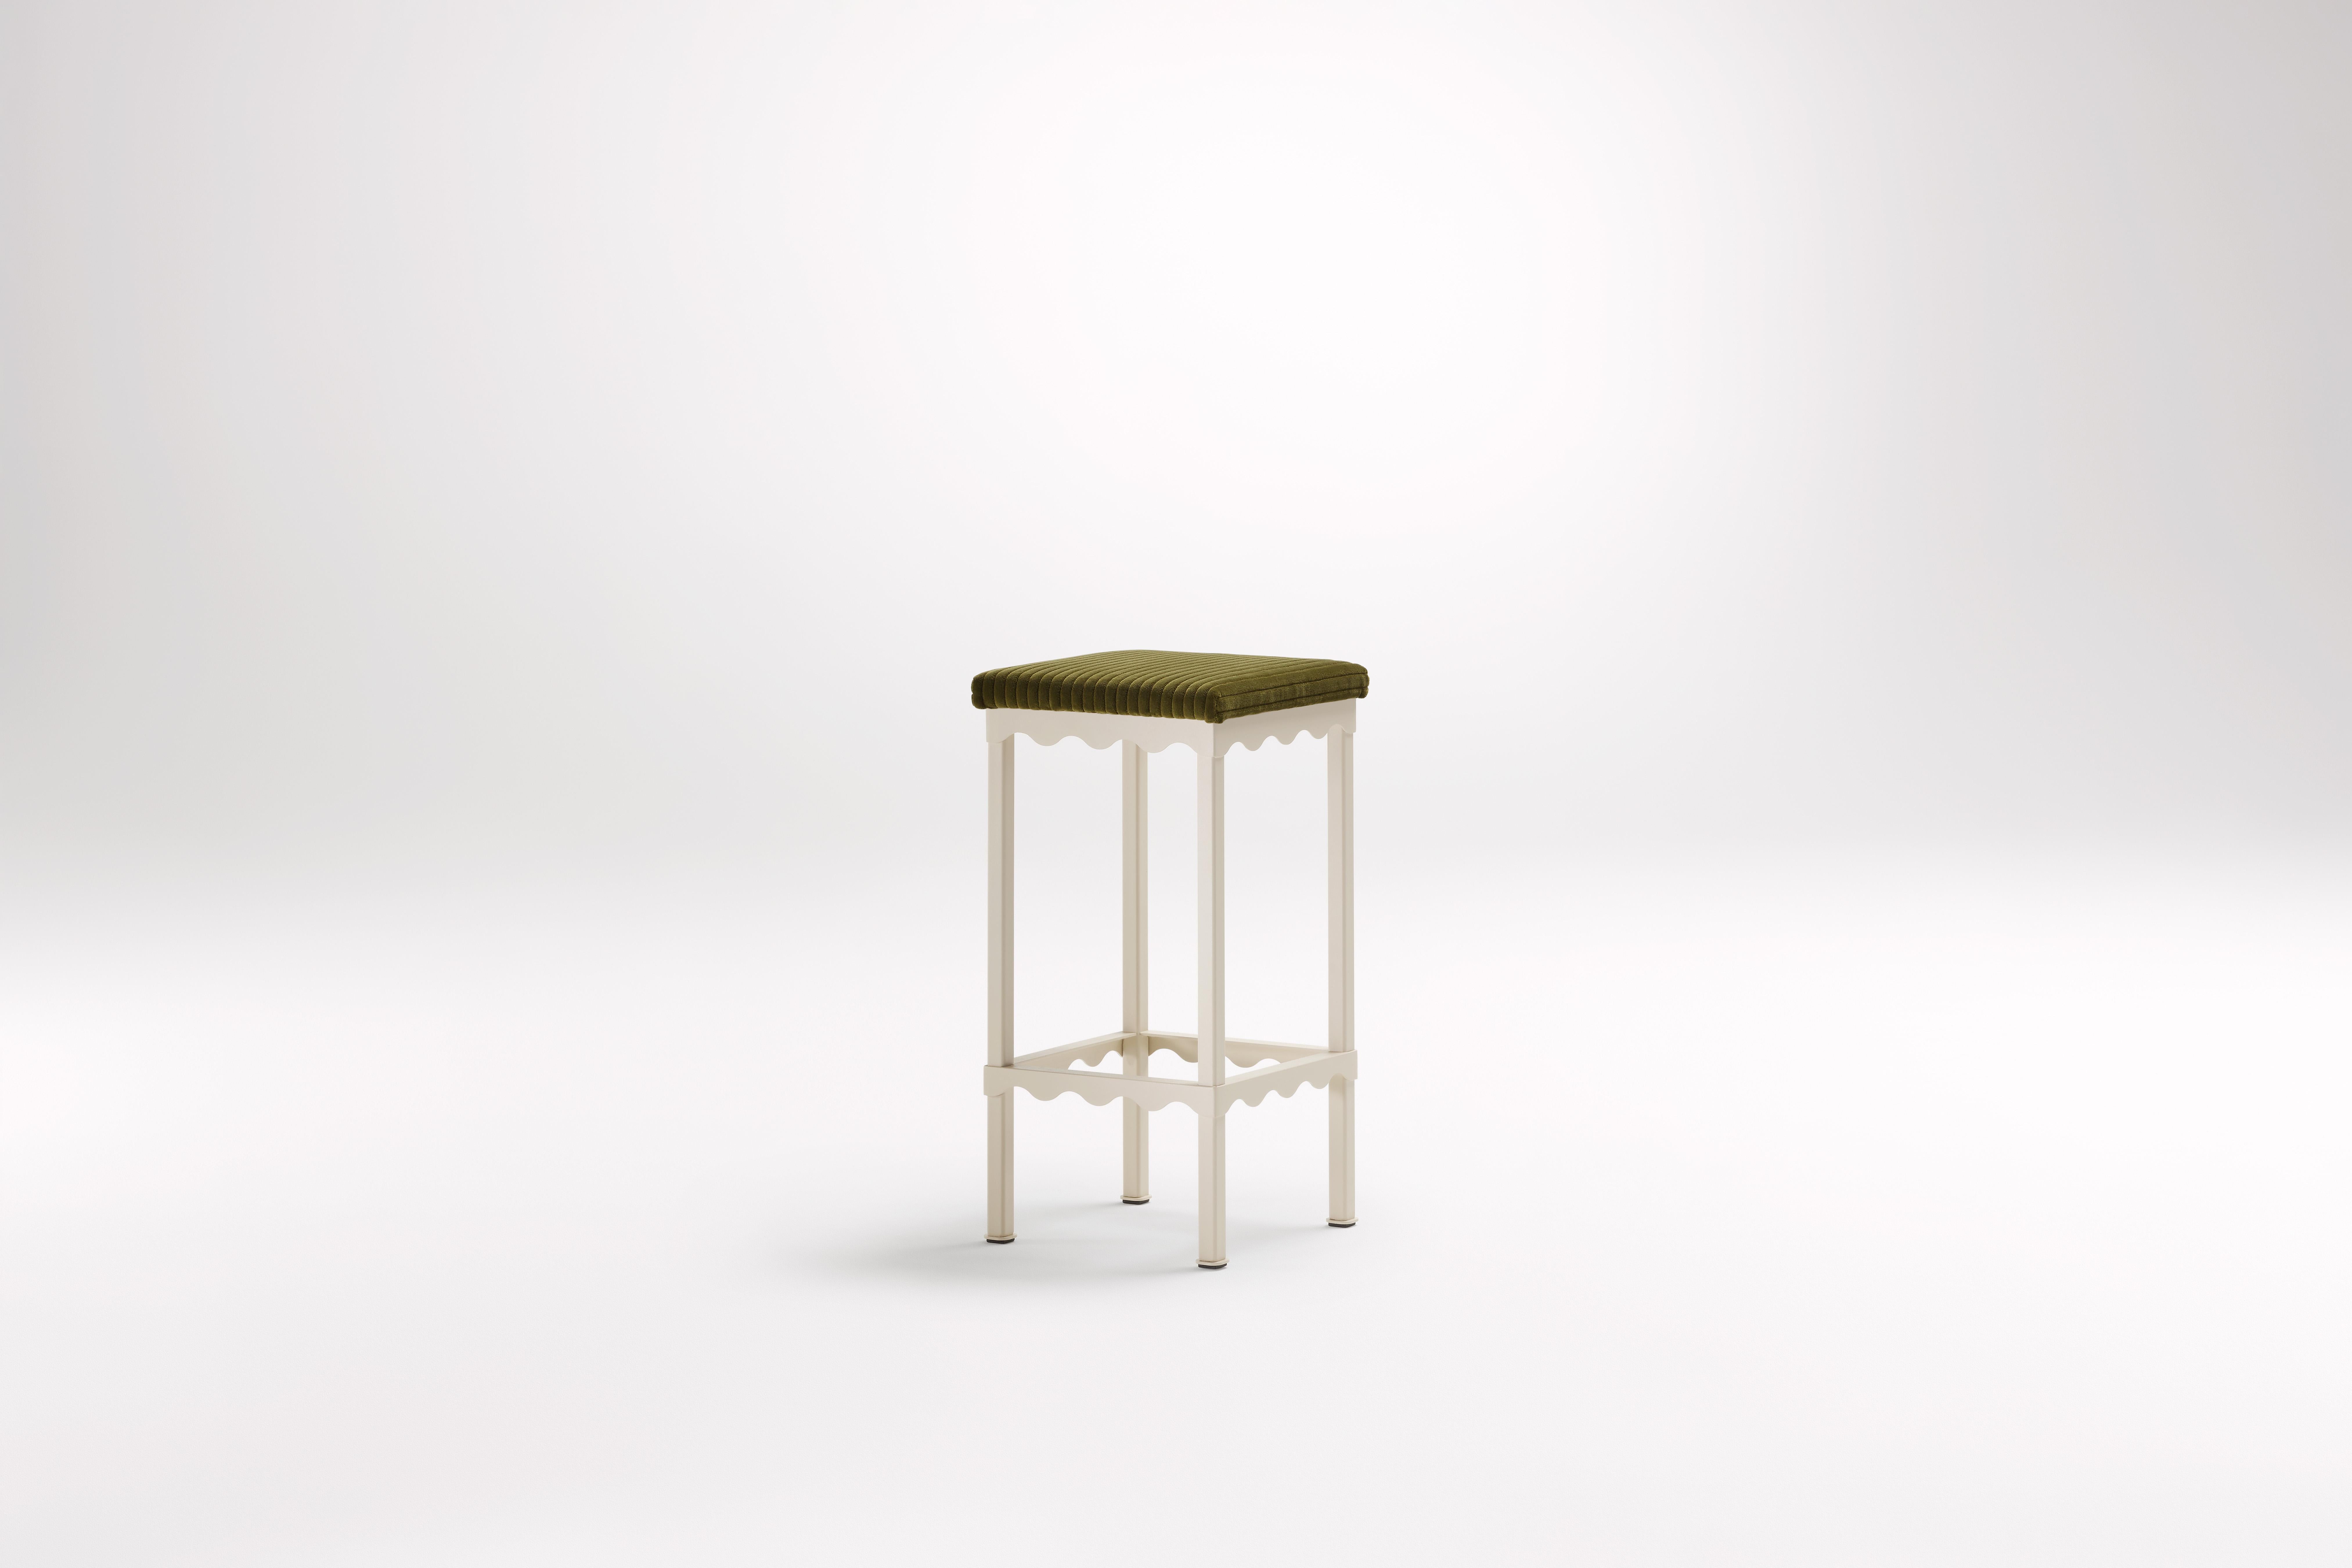 Oleander Bellini High Stool by Coco Flip
Dimensions: D 34 x W 34 x H 65/75 cm
Materials: Timber / Stone tops, Powder-coated steel frame. 
Weight: 8kg
Frame Finishes: Textura Paperbark.

Coco Flip is a Melbourne based furniture and lighting design